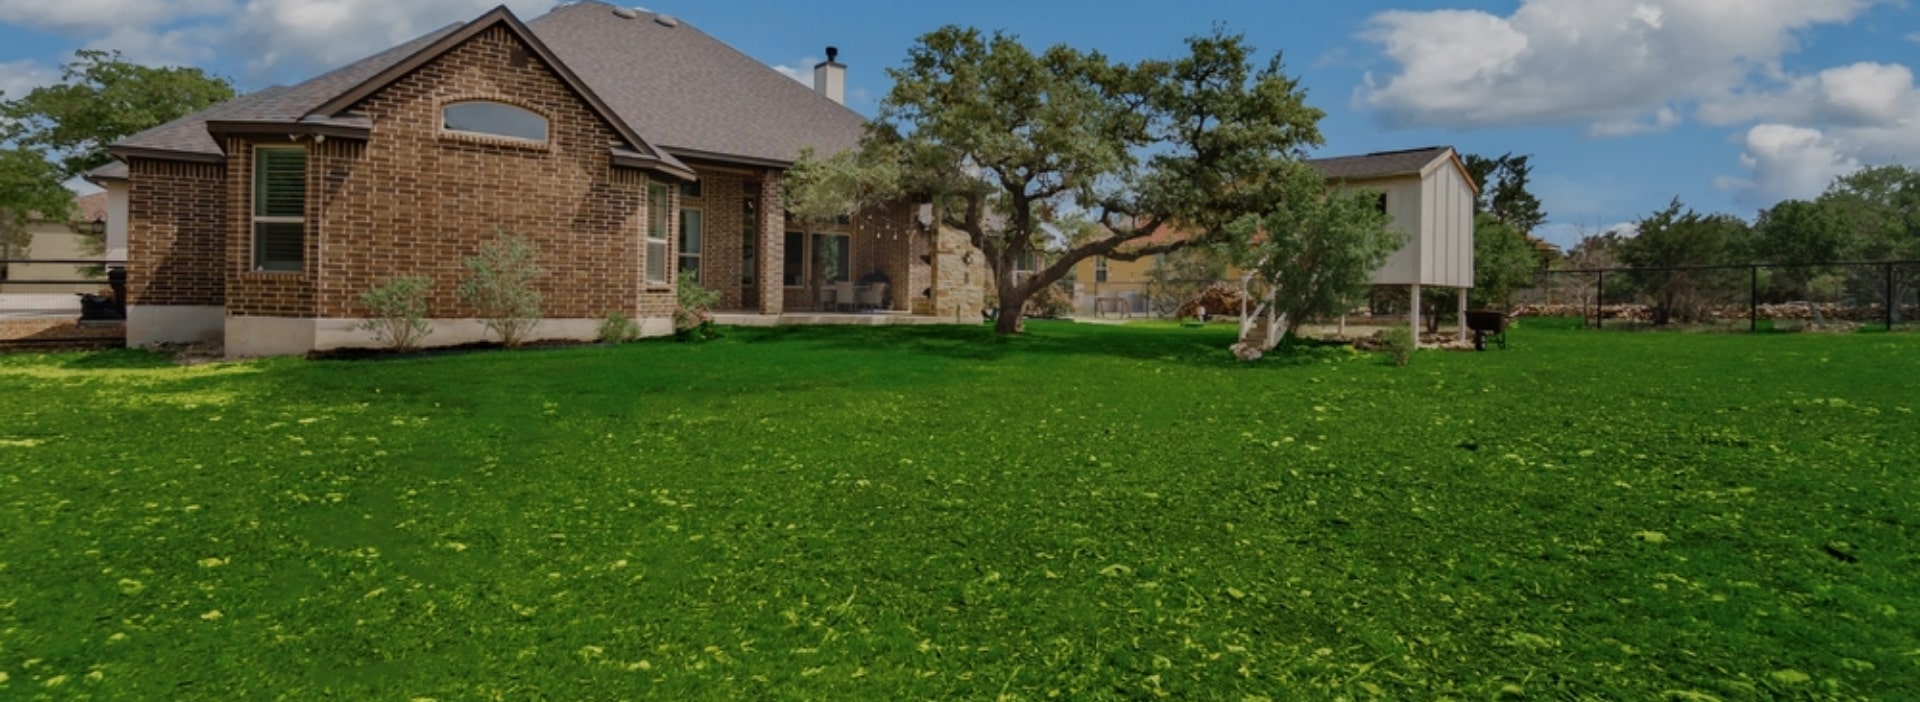 Residential Lawn Mowing Garland